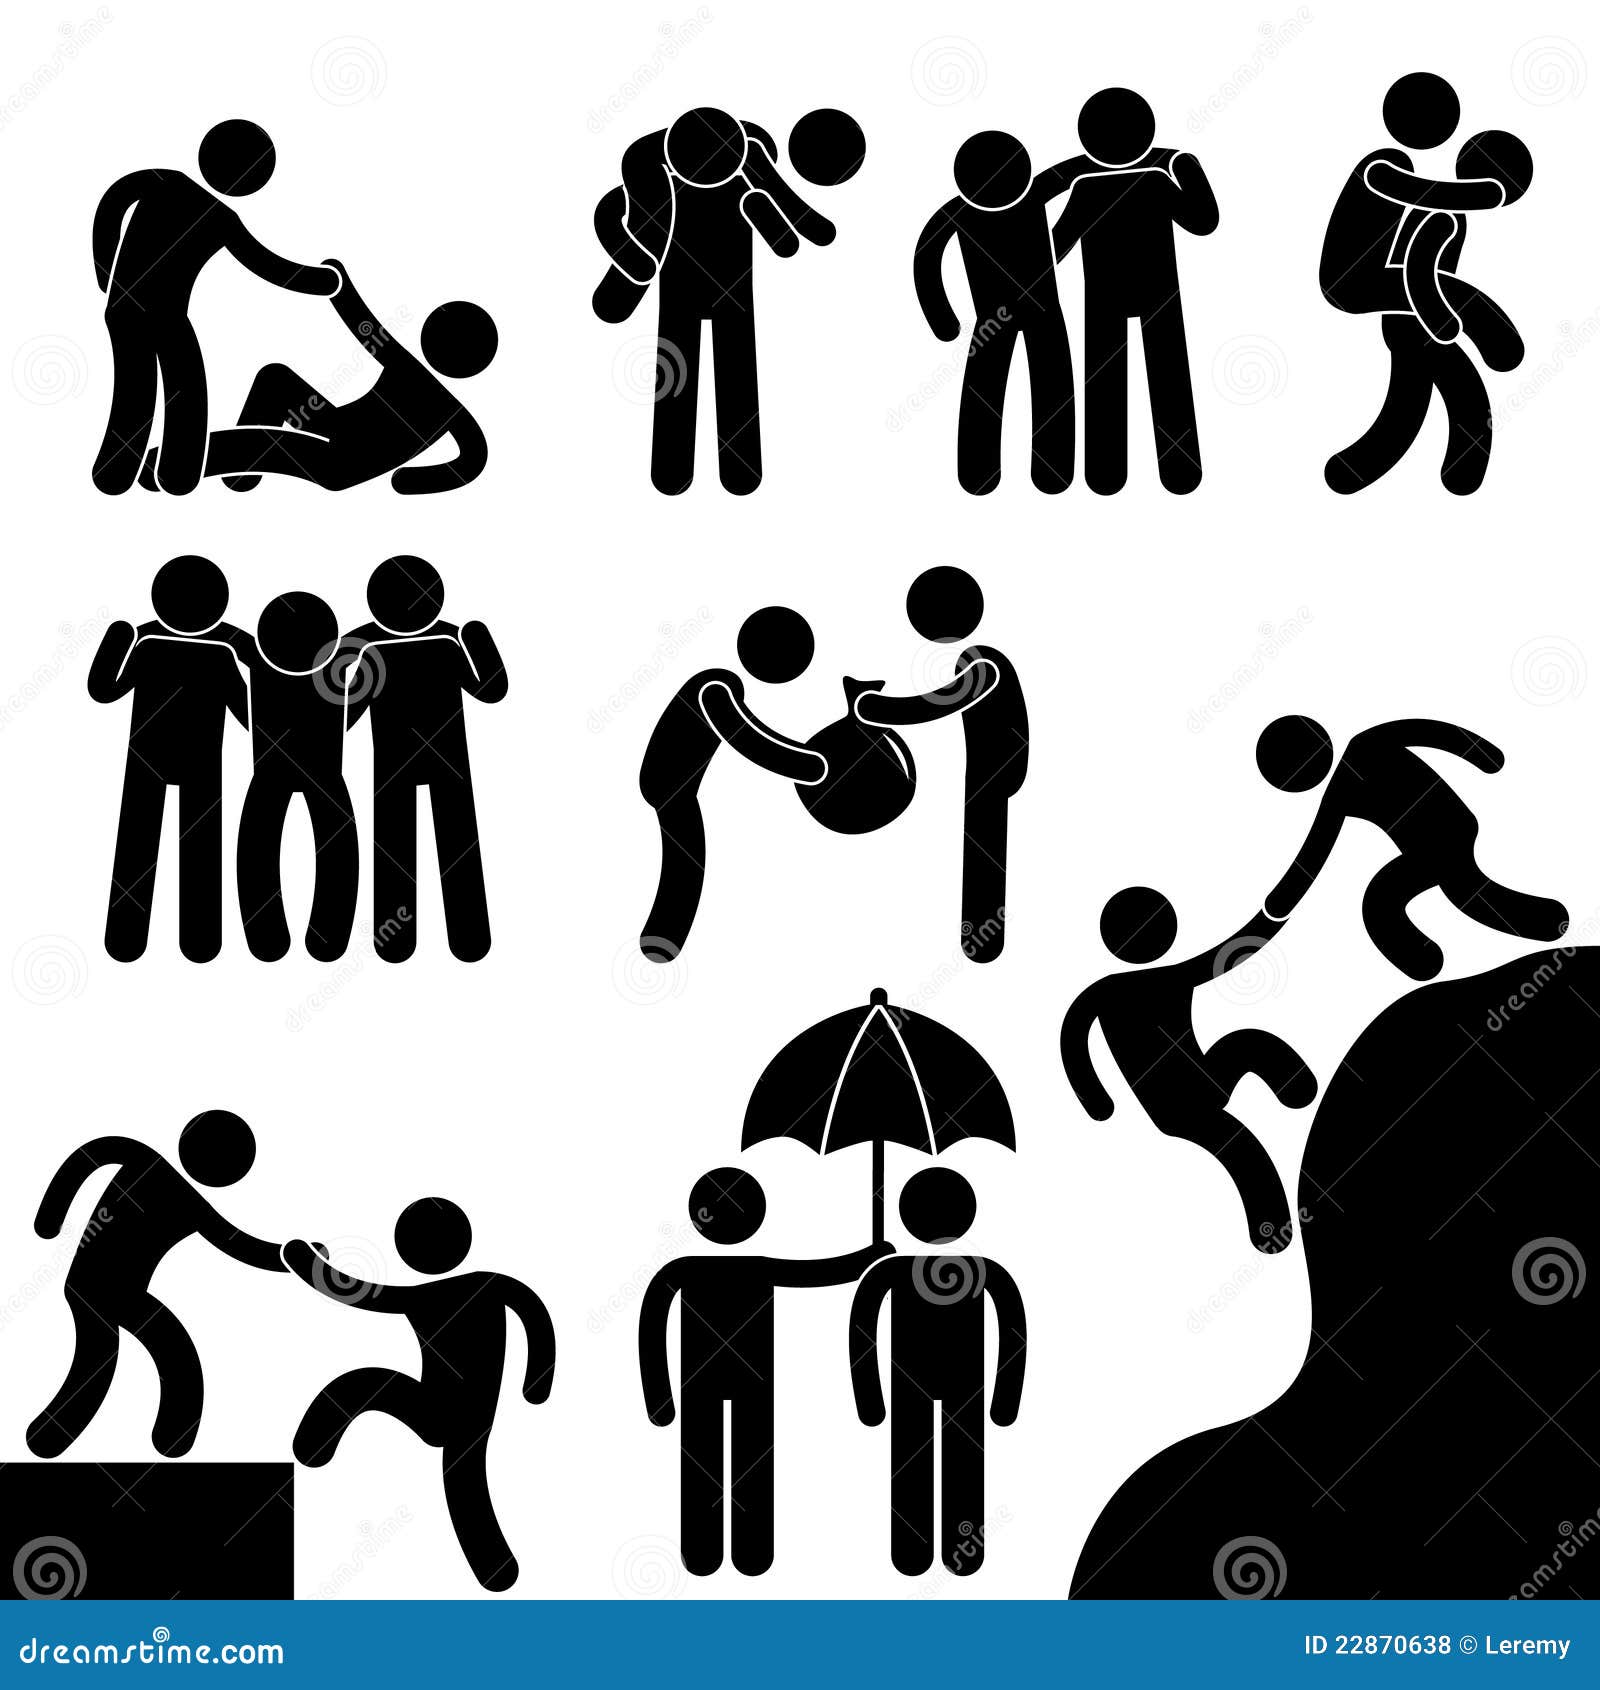 Premium Vector | One continuous line drawing of people helping each other  to achieve a goal teamwork minimalist concept problemsolving business  concept teamwork vector graphic design illustration